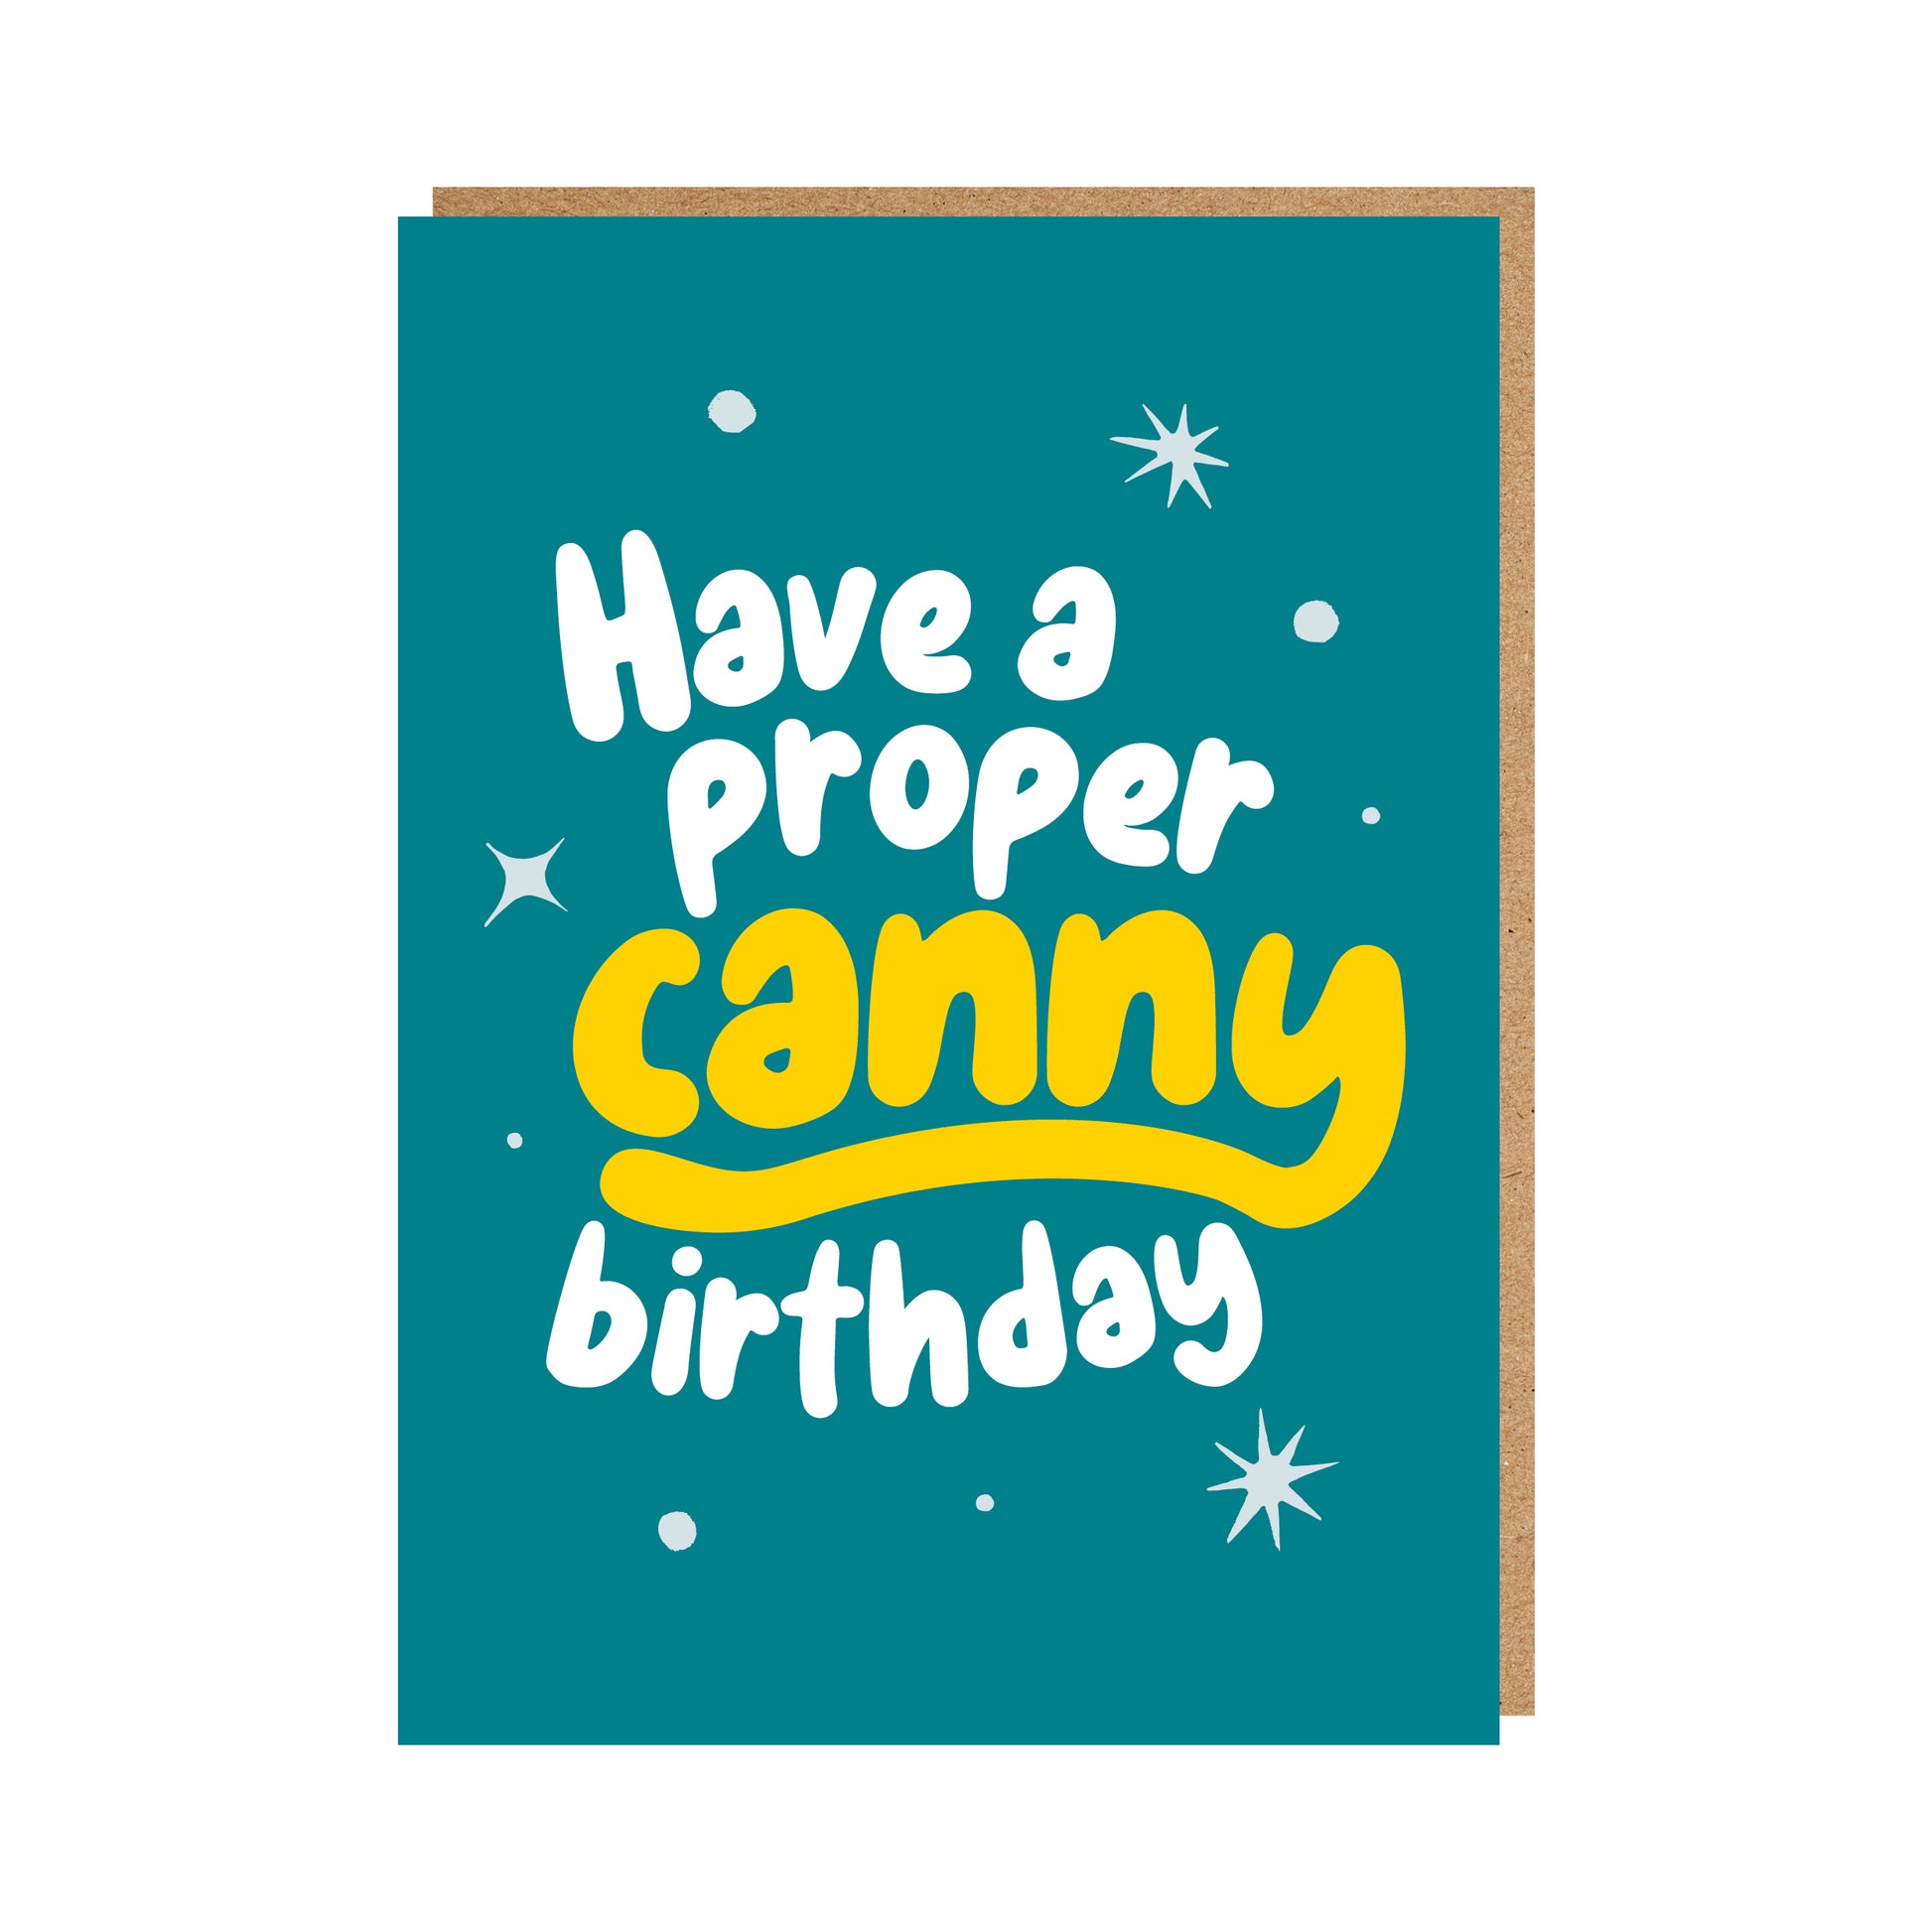 Geordie Birthday Card with text reading "Have a proper canny birthday"